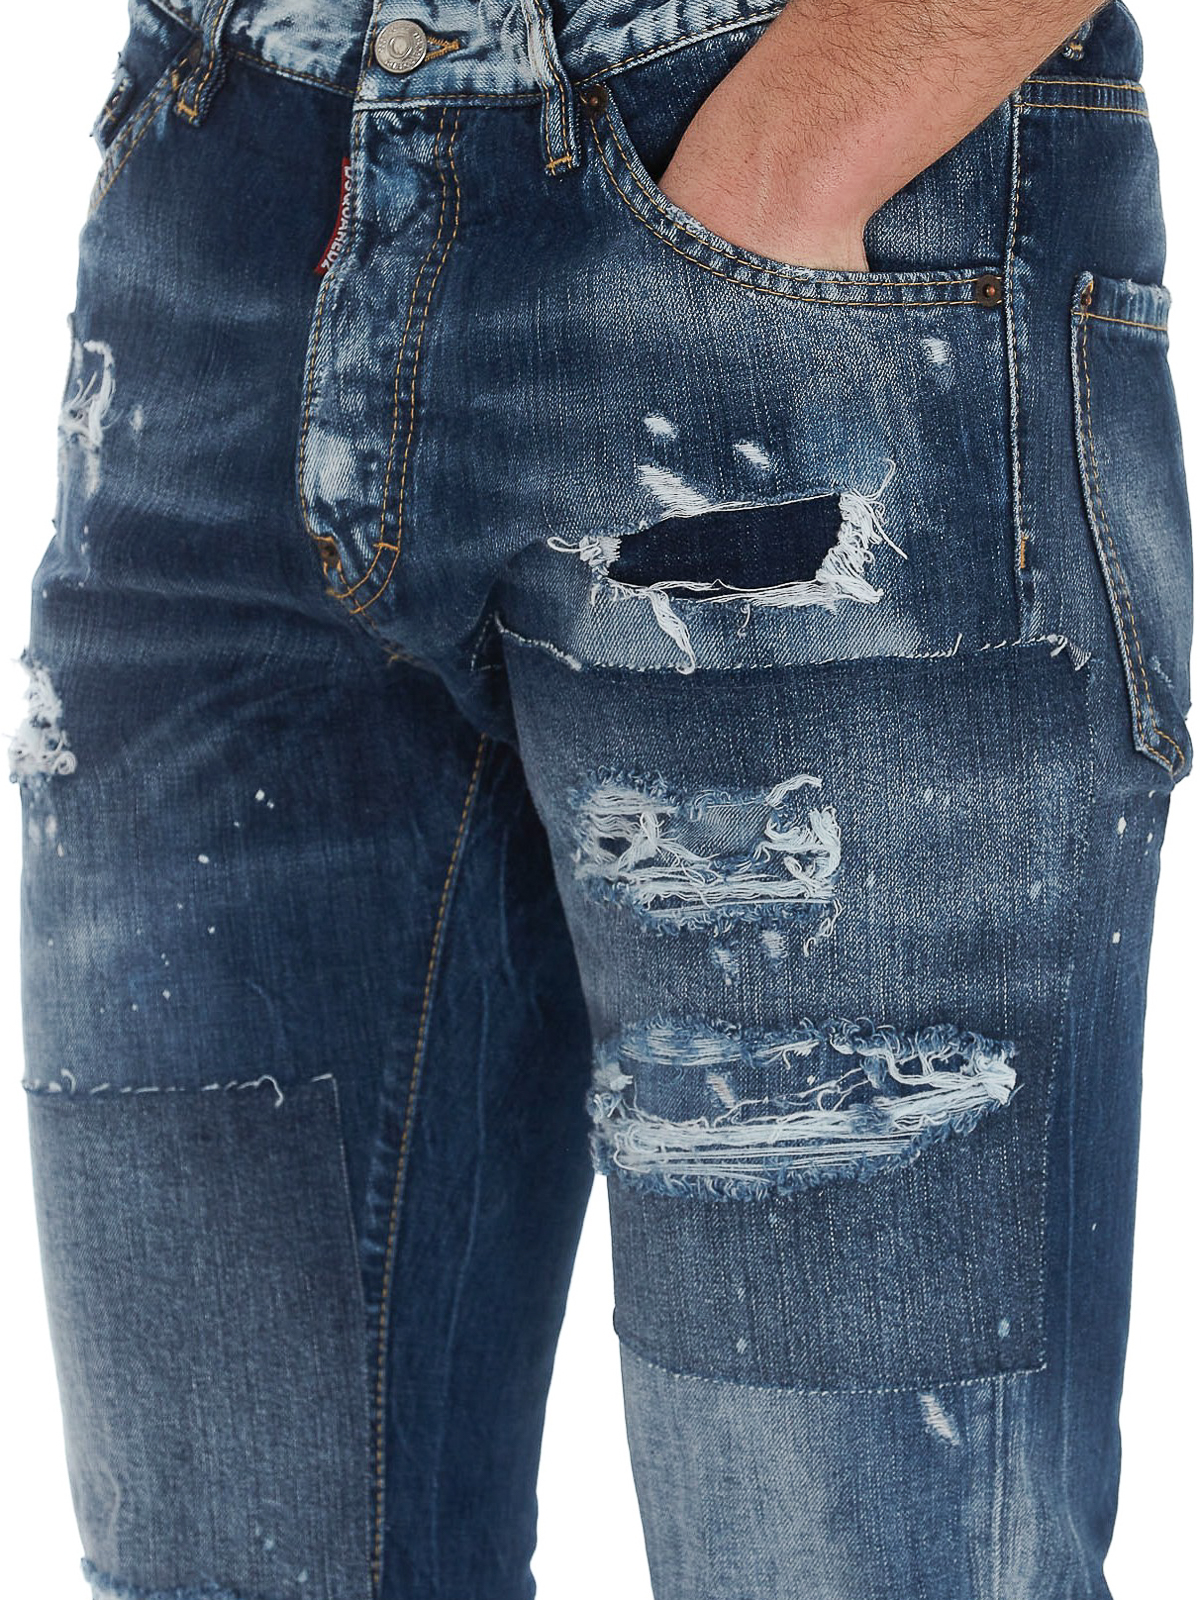 Straight leg jeans Dsquared2 - Cool guy distressed jeans 